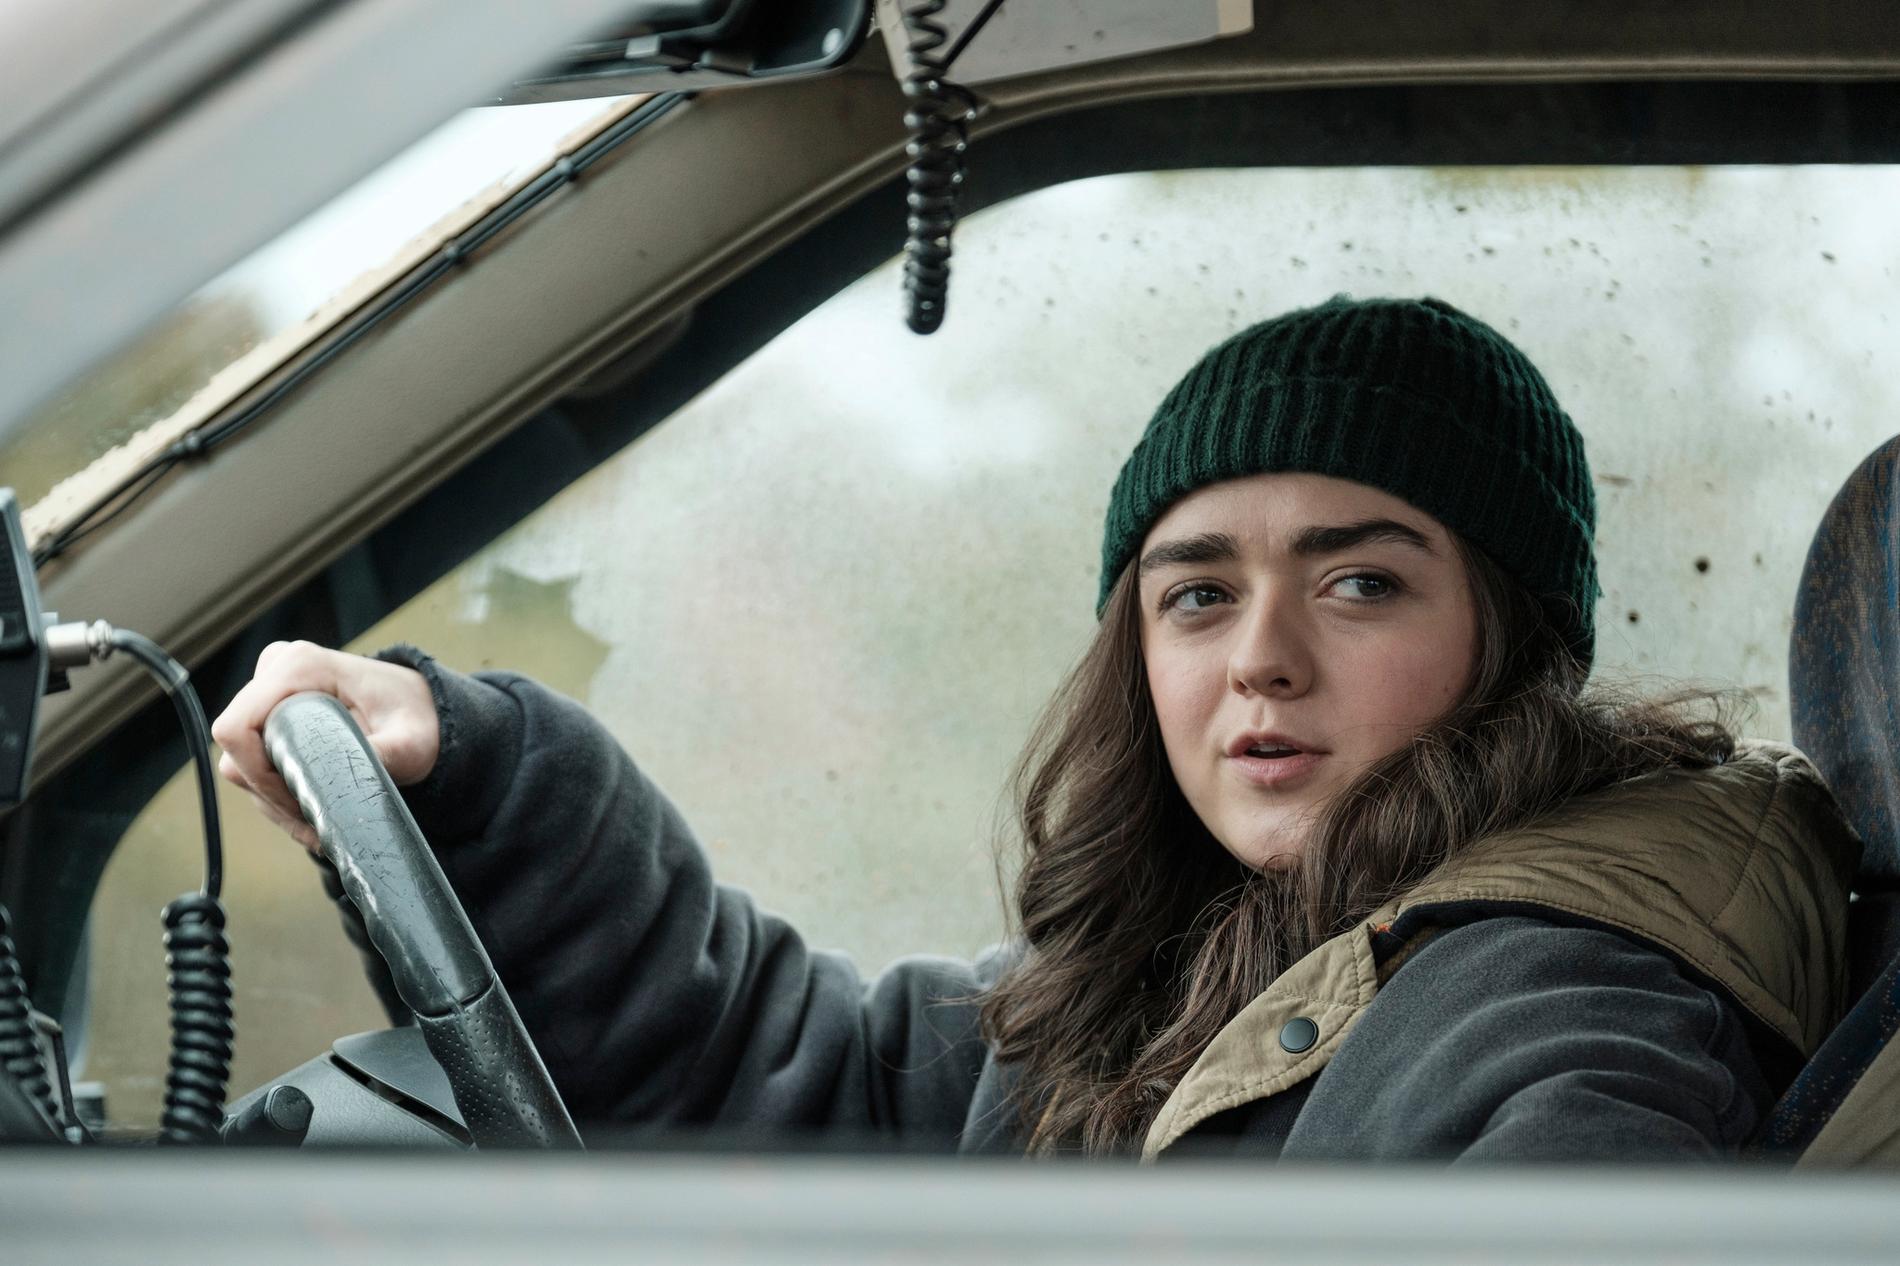  Maisie Williams i ”Two weeks to live”.